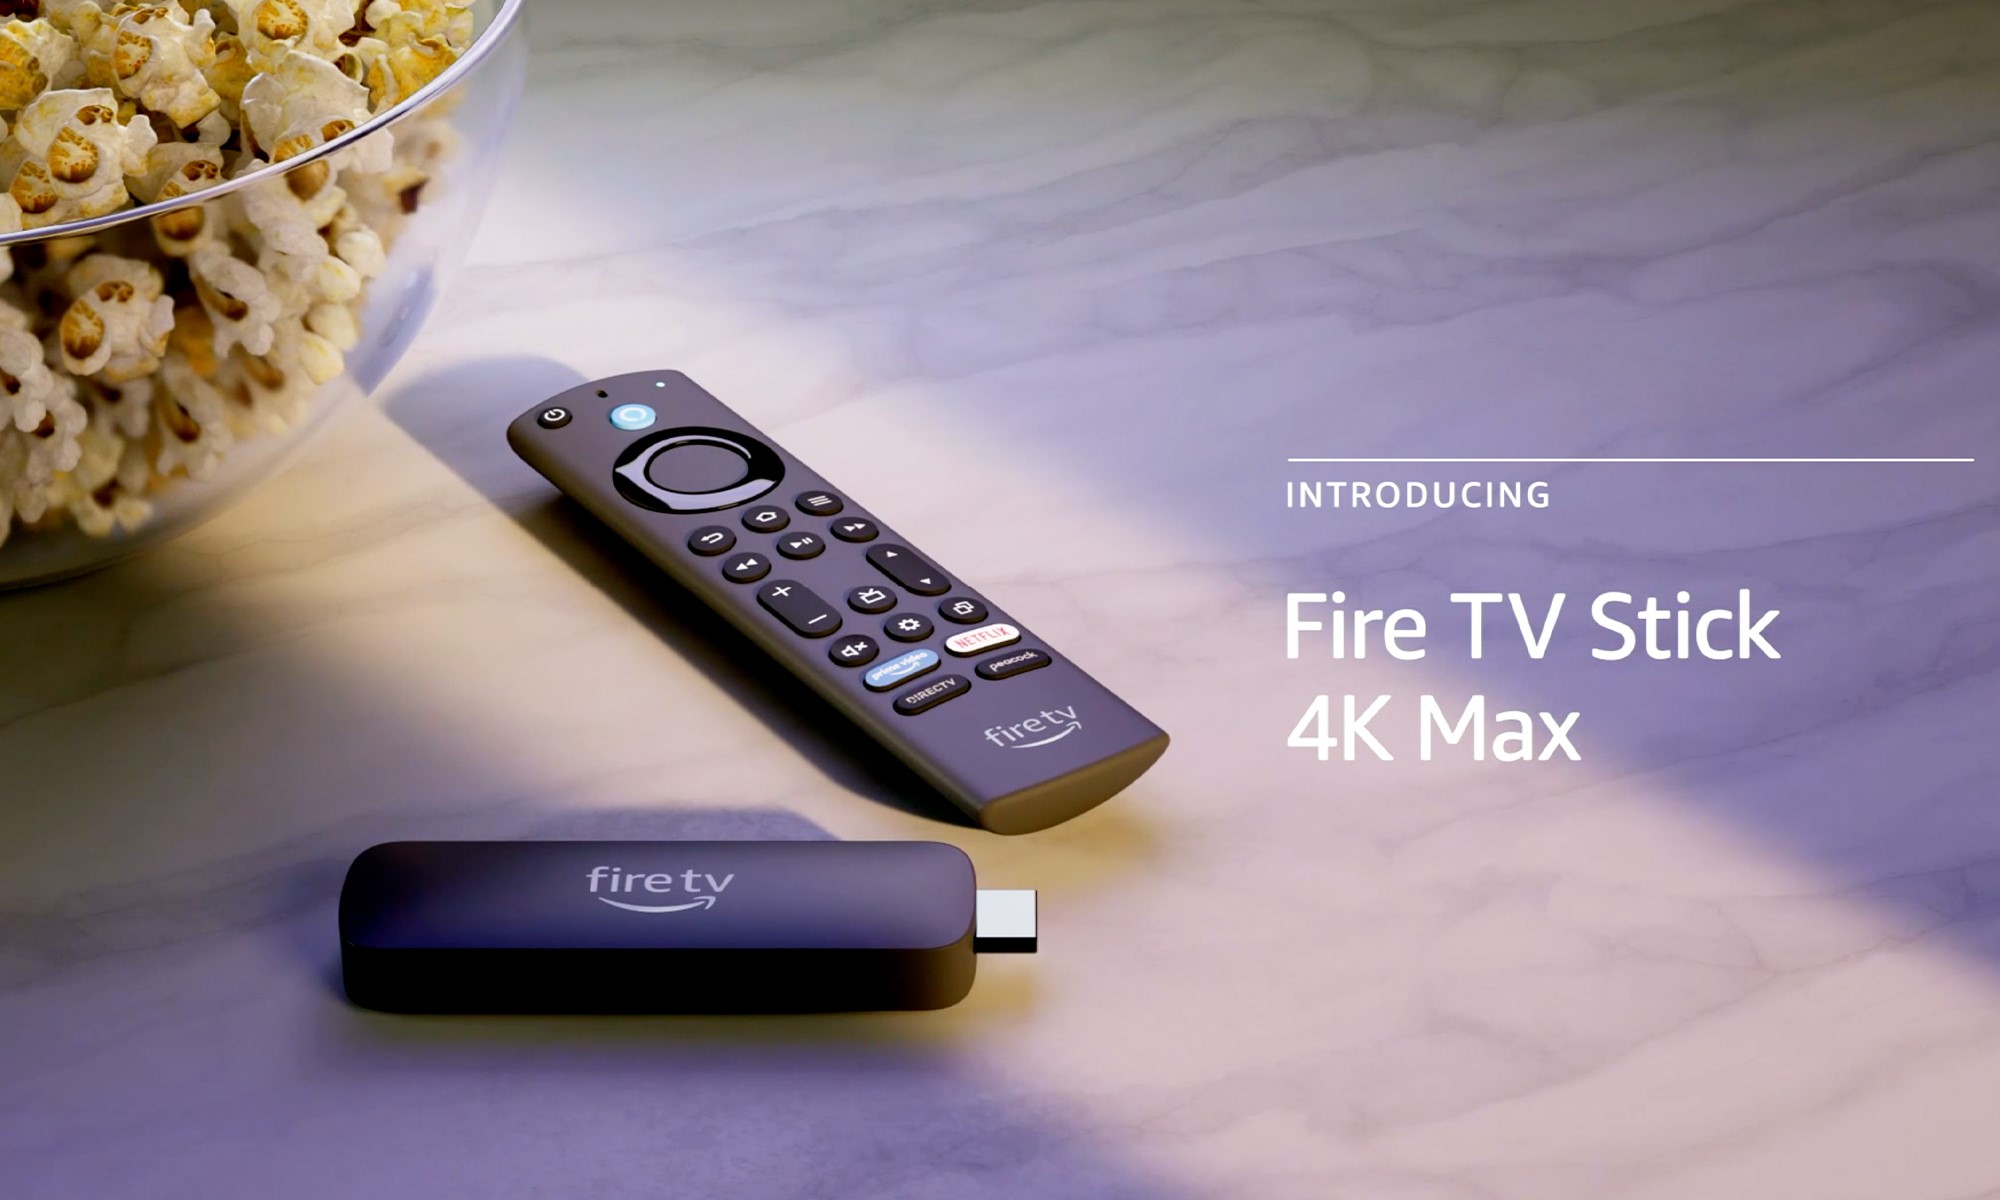 Amazon product photo of the Fire TV Stick 4K Max. The stick-like device sits next to a remote with buttons all over its face. They are on a modern countertop with the edge of a bowl of popcorn visible to the left. | DeviceDaily.com